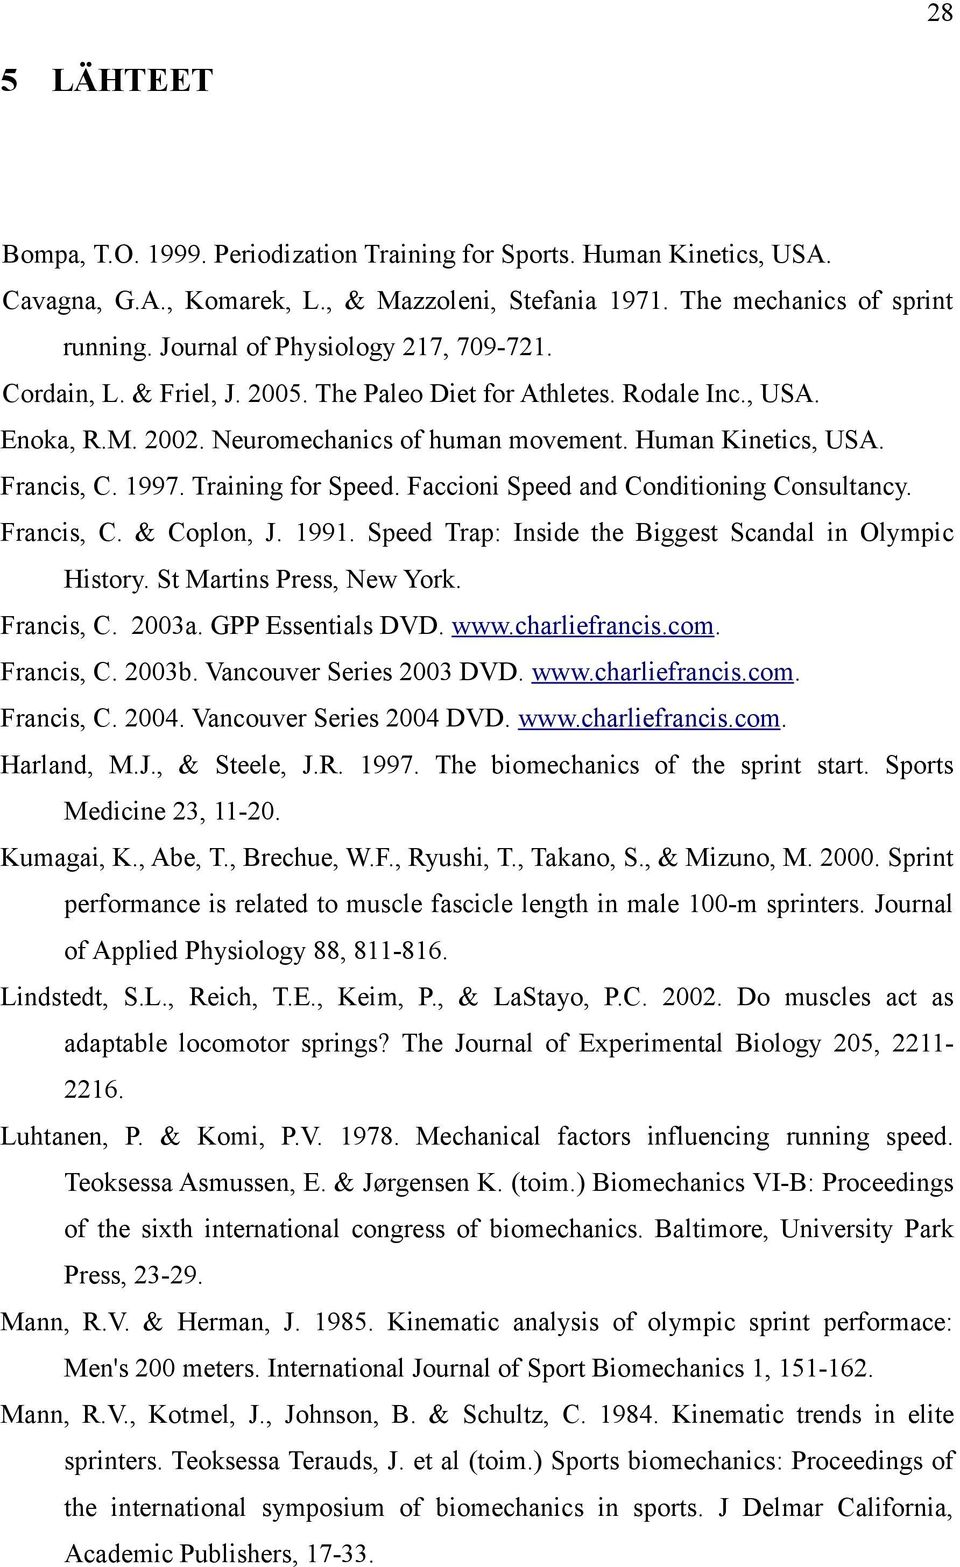 1997. Training for Speed. Faccioni Speed and Conditioning Consultancy. Francis, C. & Coplon, J. 1991. Speed Trap: Inside the Biggest Scandal in Olympic History. St Martins Press, New York. Francis, C. 2003a.